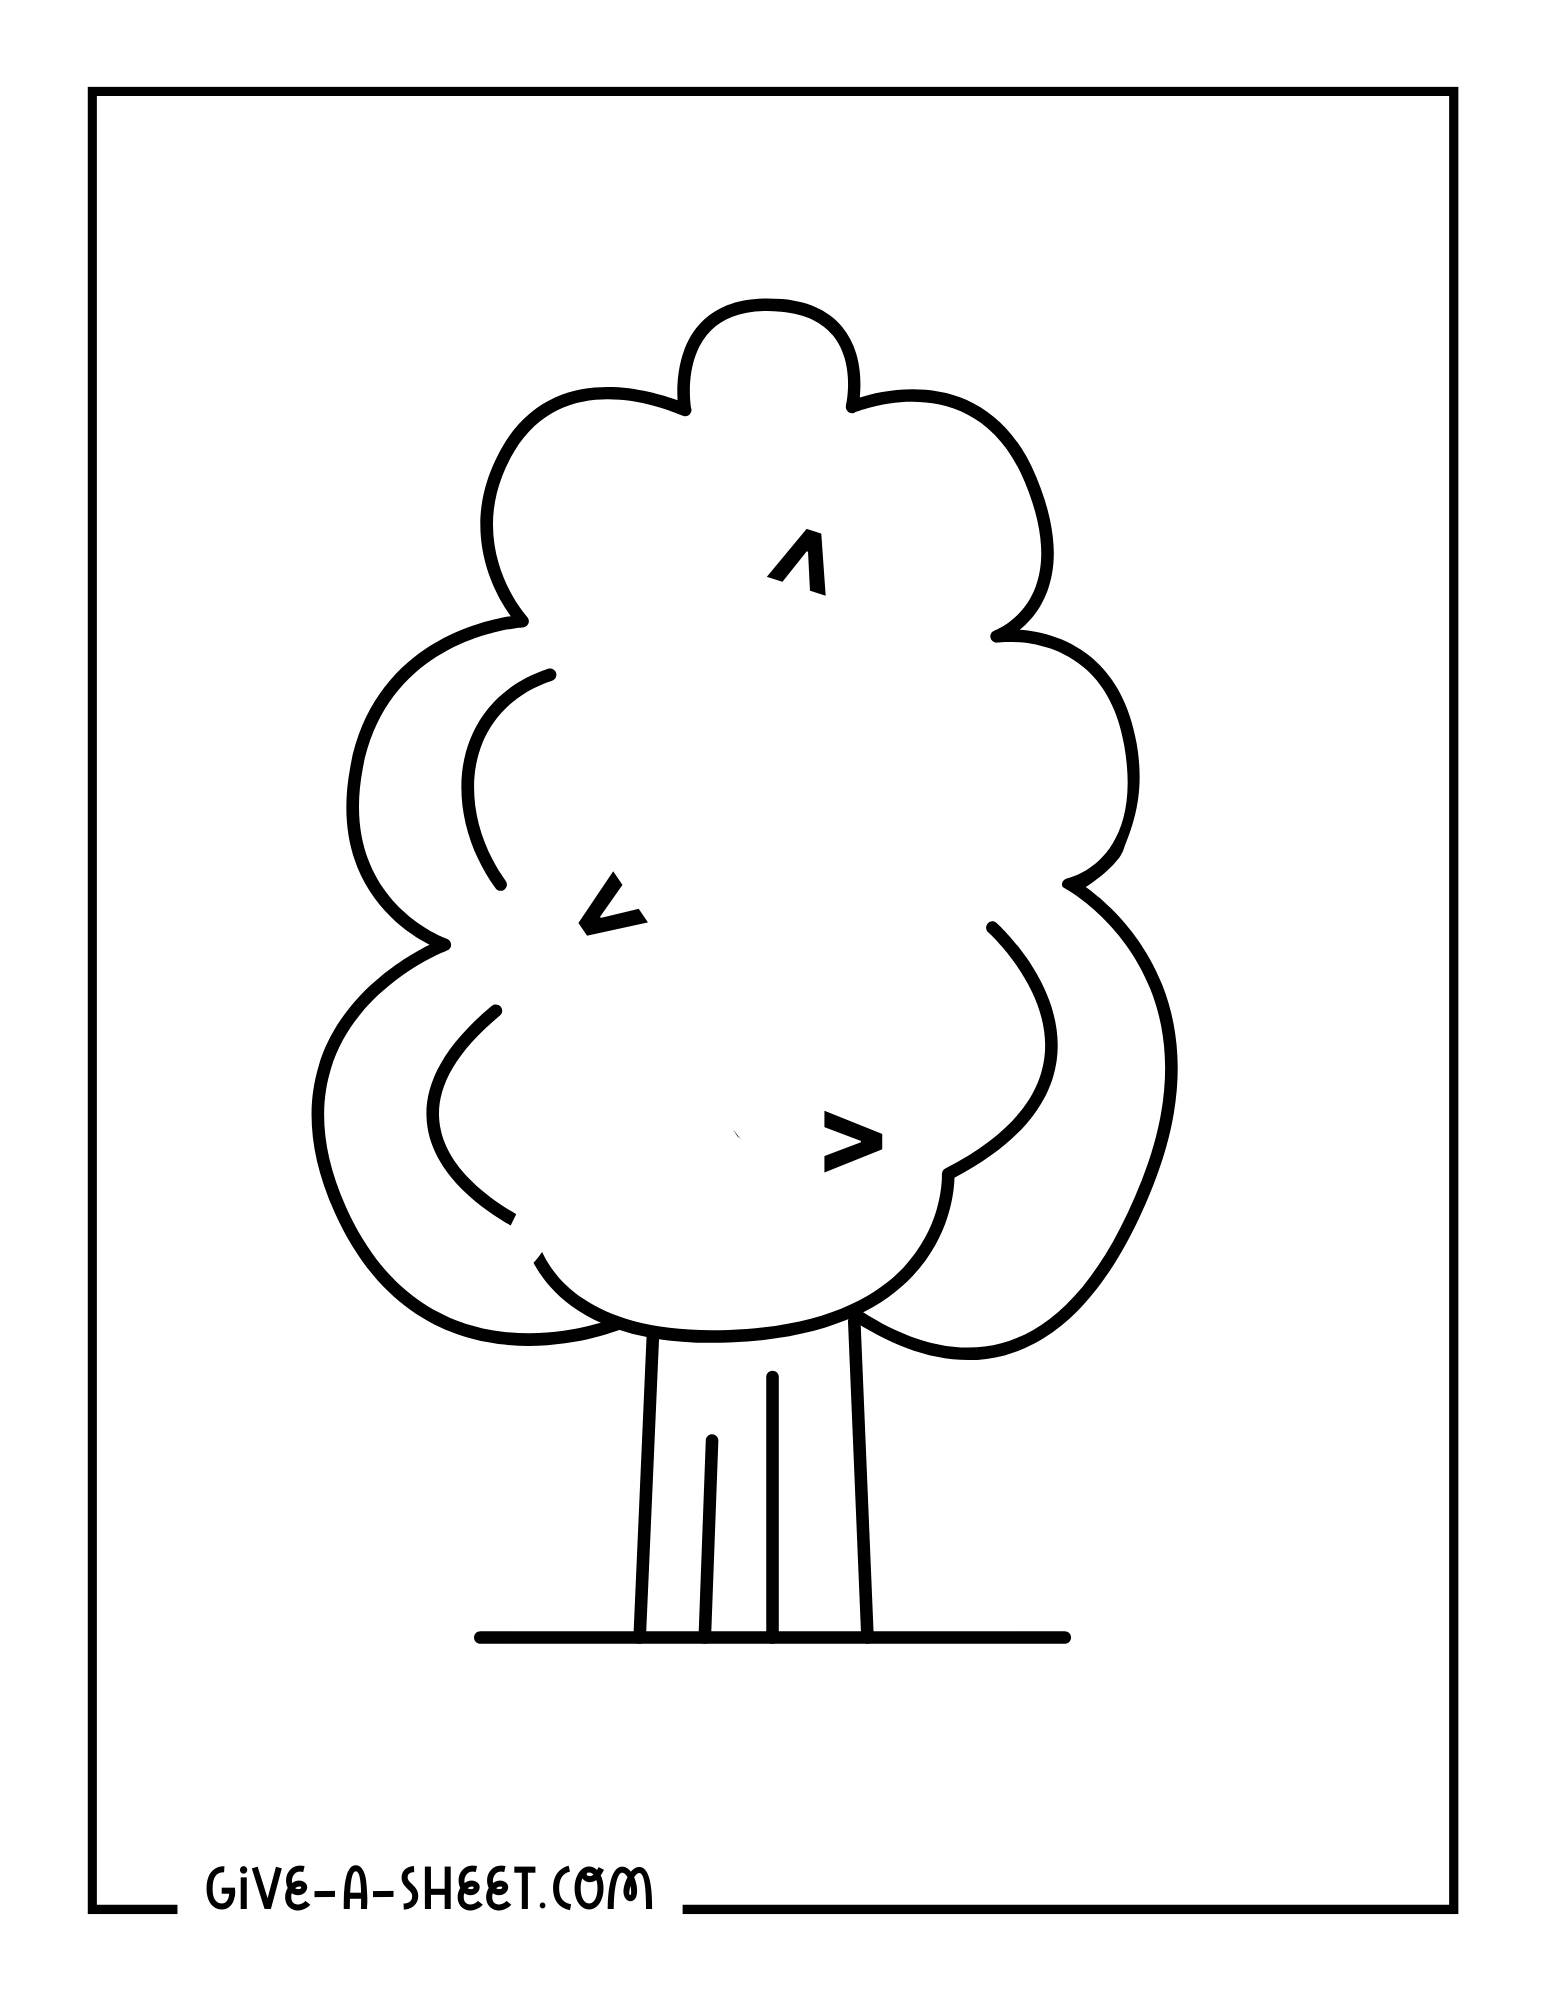 Easy tree outline coloring sheet for preschoolers.